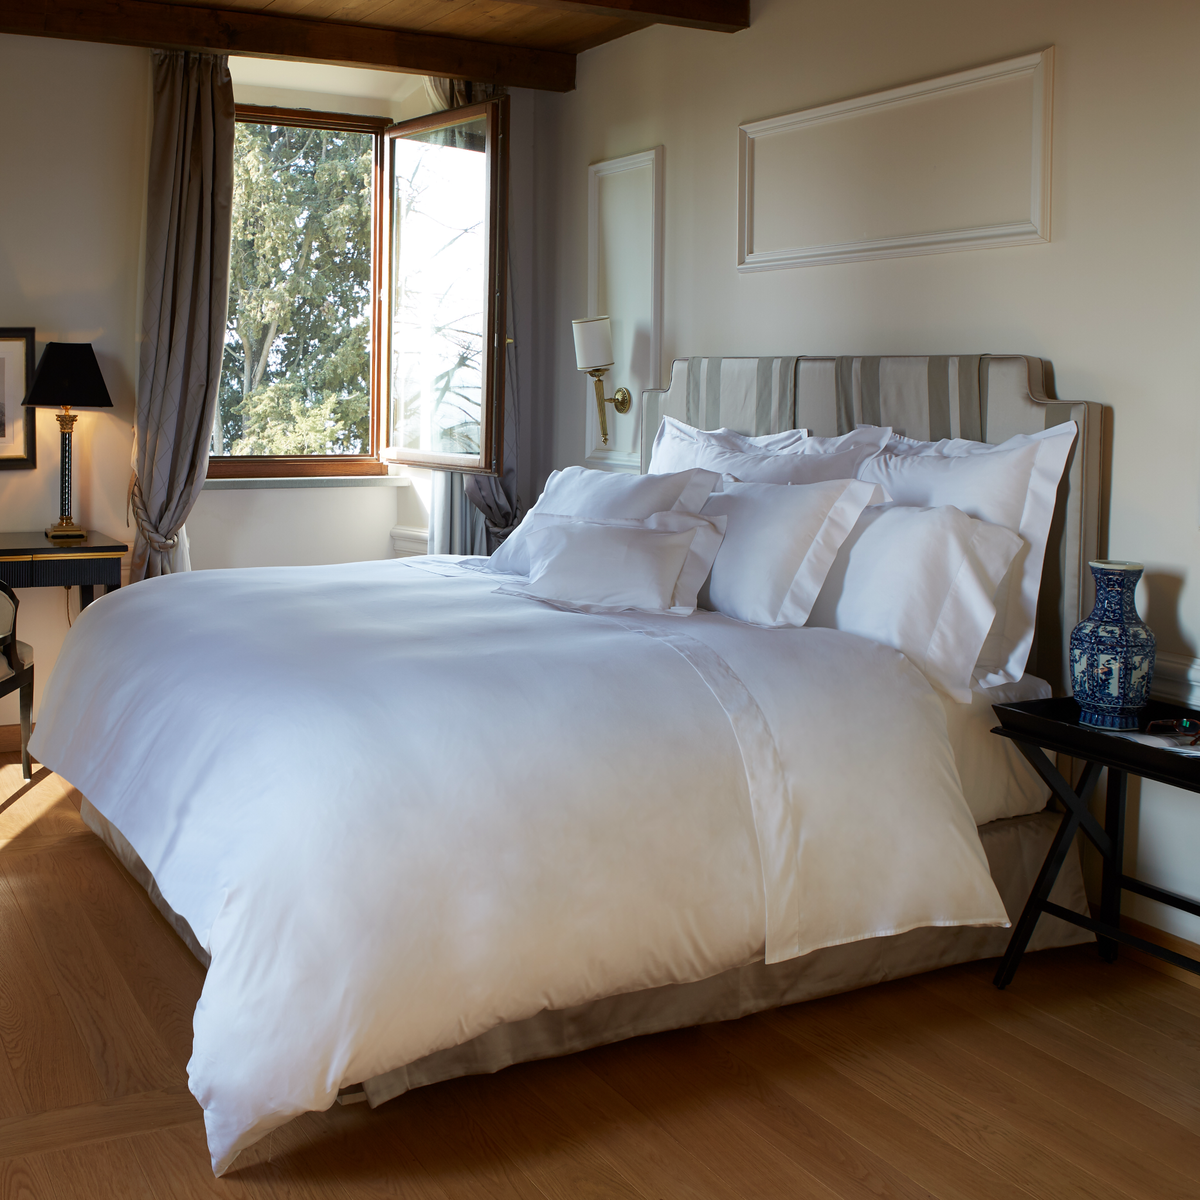 Full Bed Dressed in Signoria Nuvola Bedding in White Color